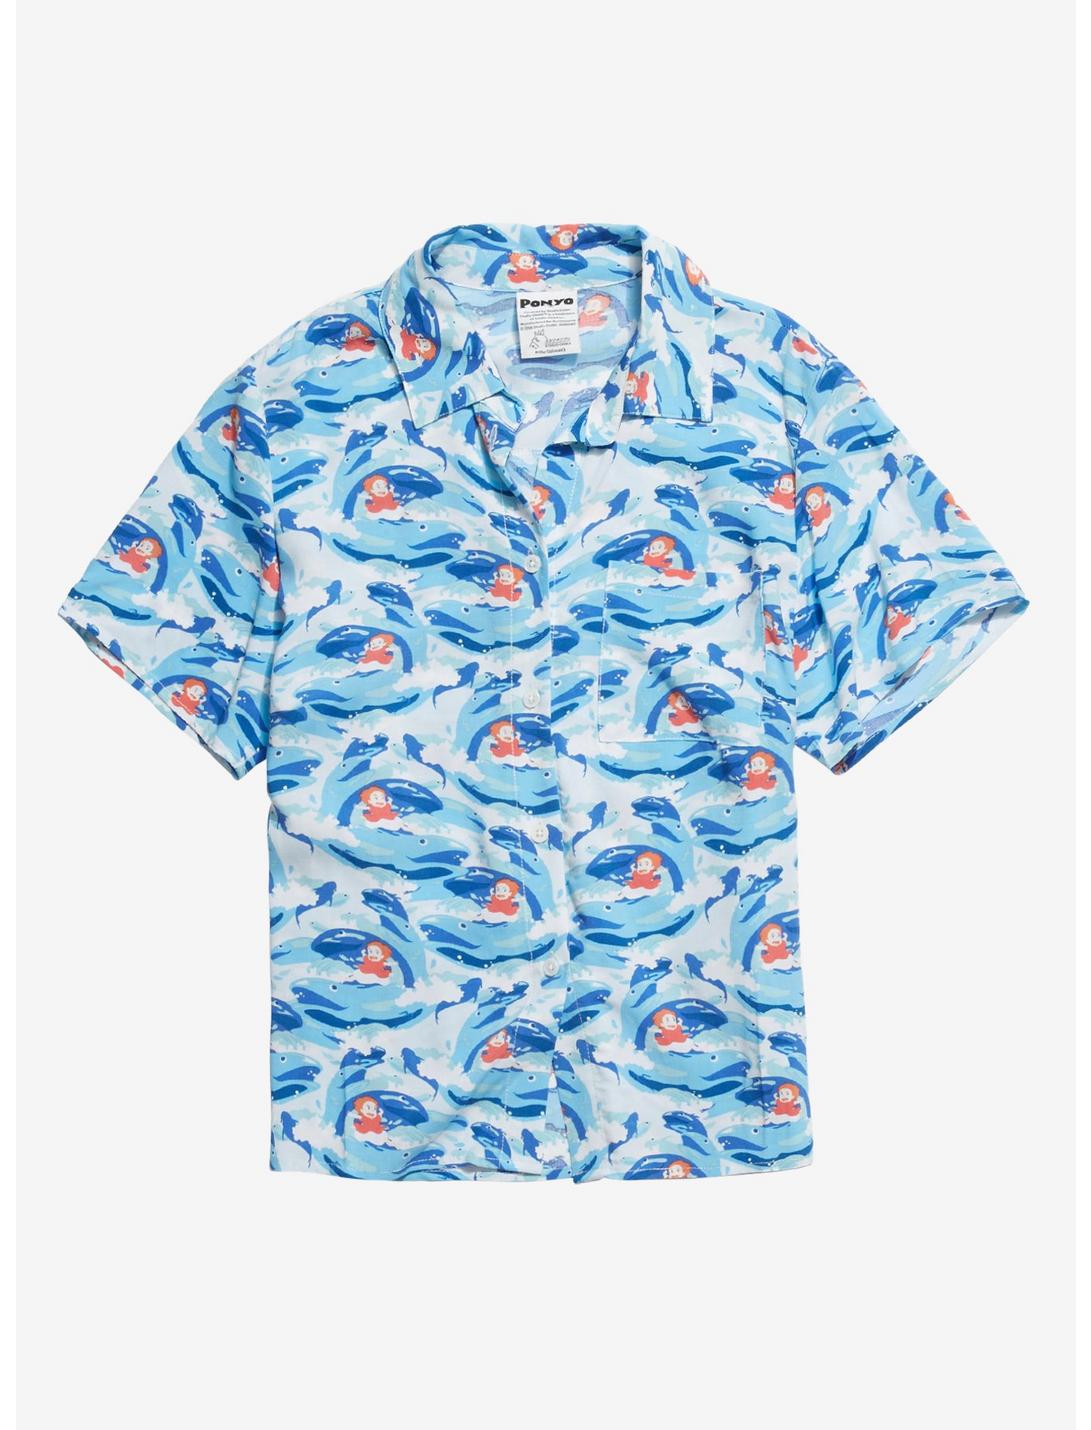 Her Universe Studio Ghibli Capsule Collection Ponyo Wave Print Woven Button-Up, MULTI, hi-res